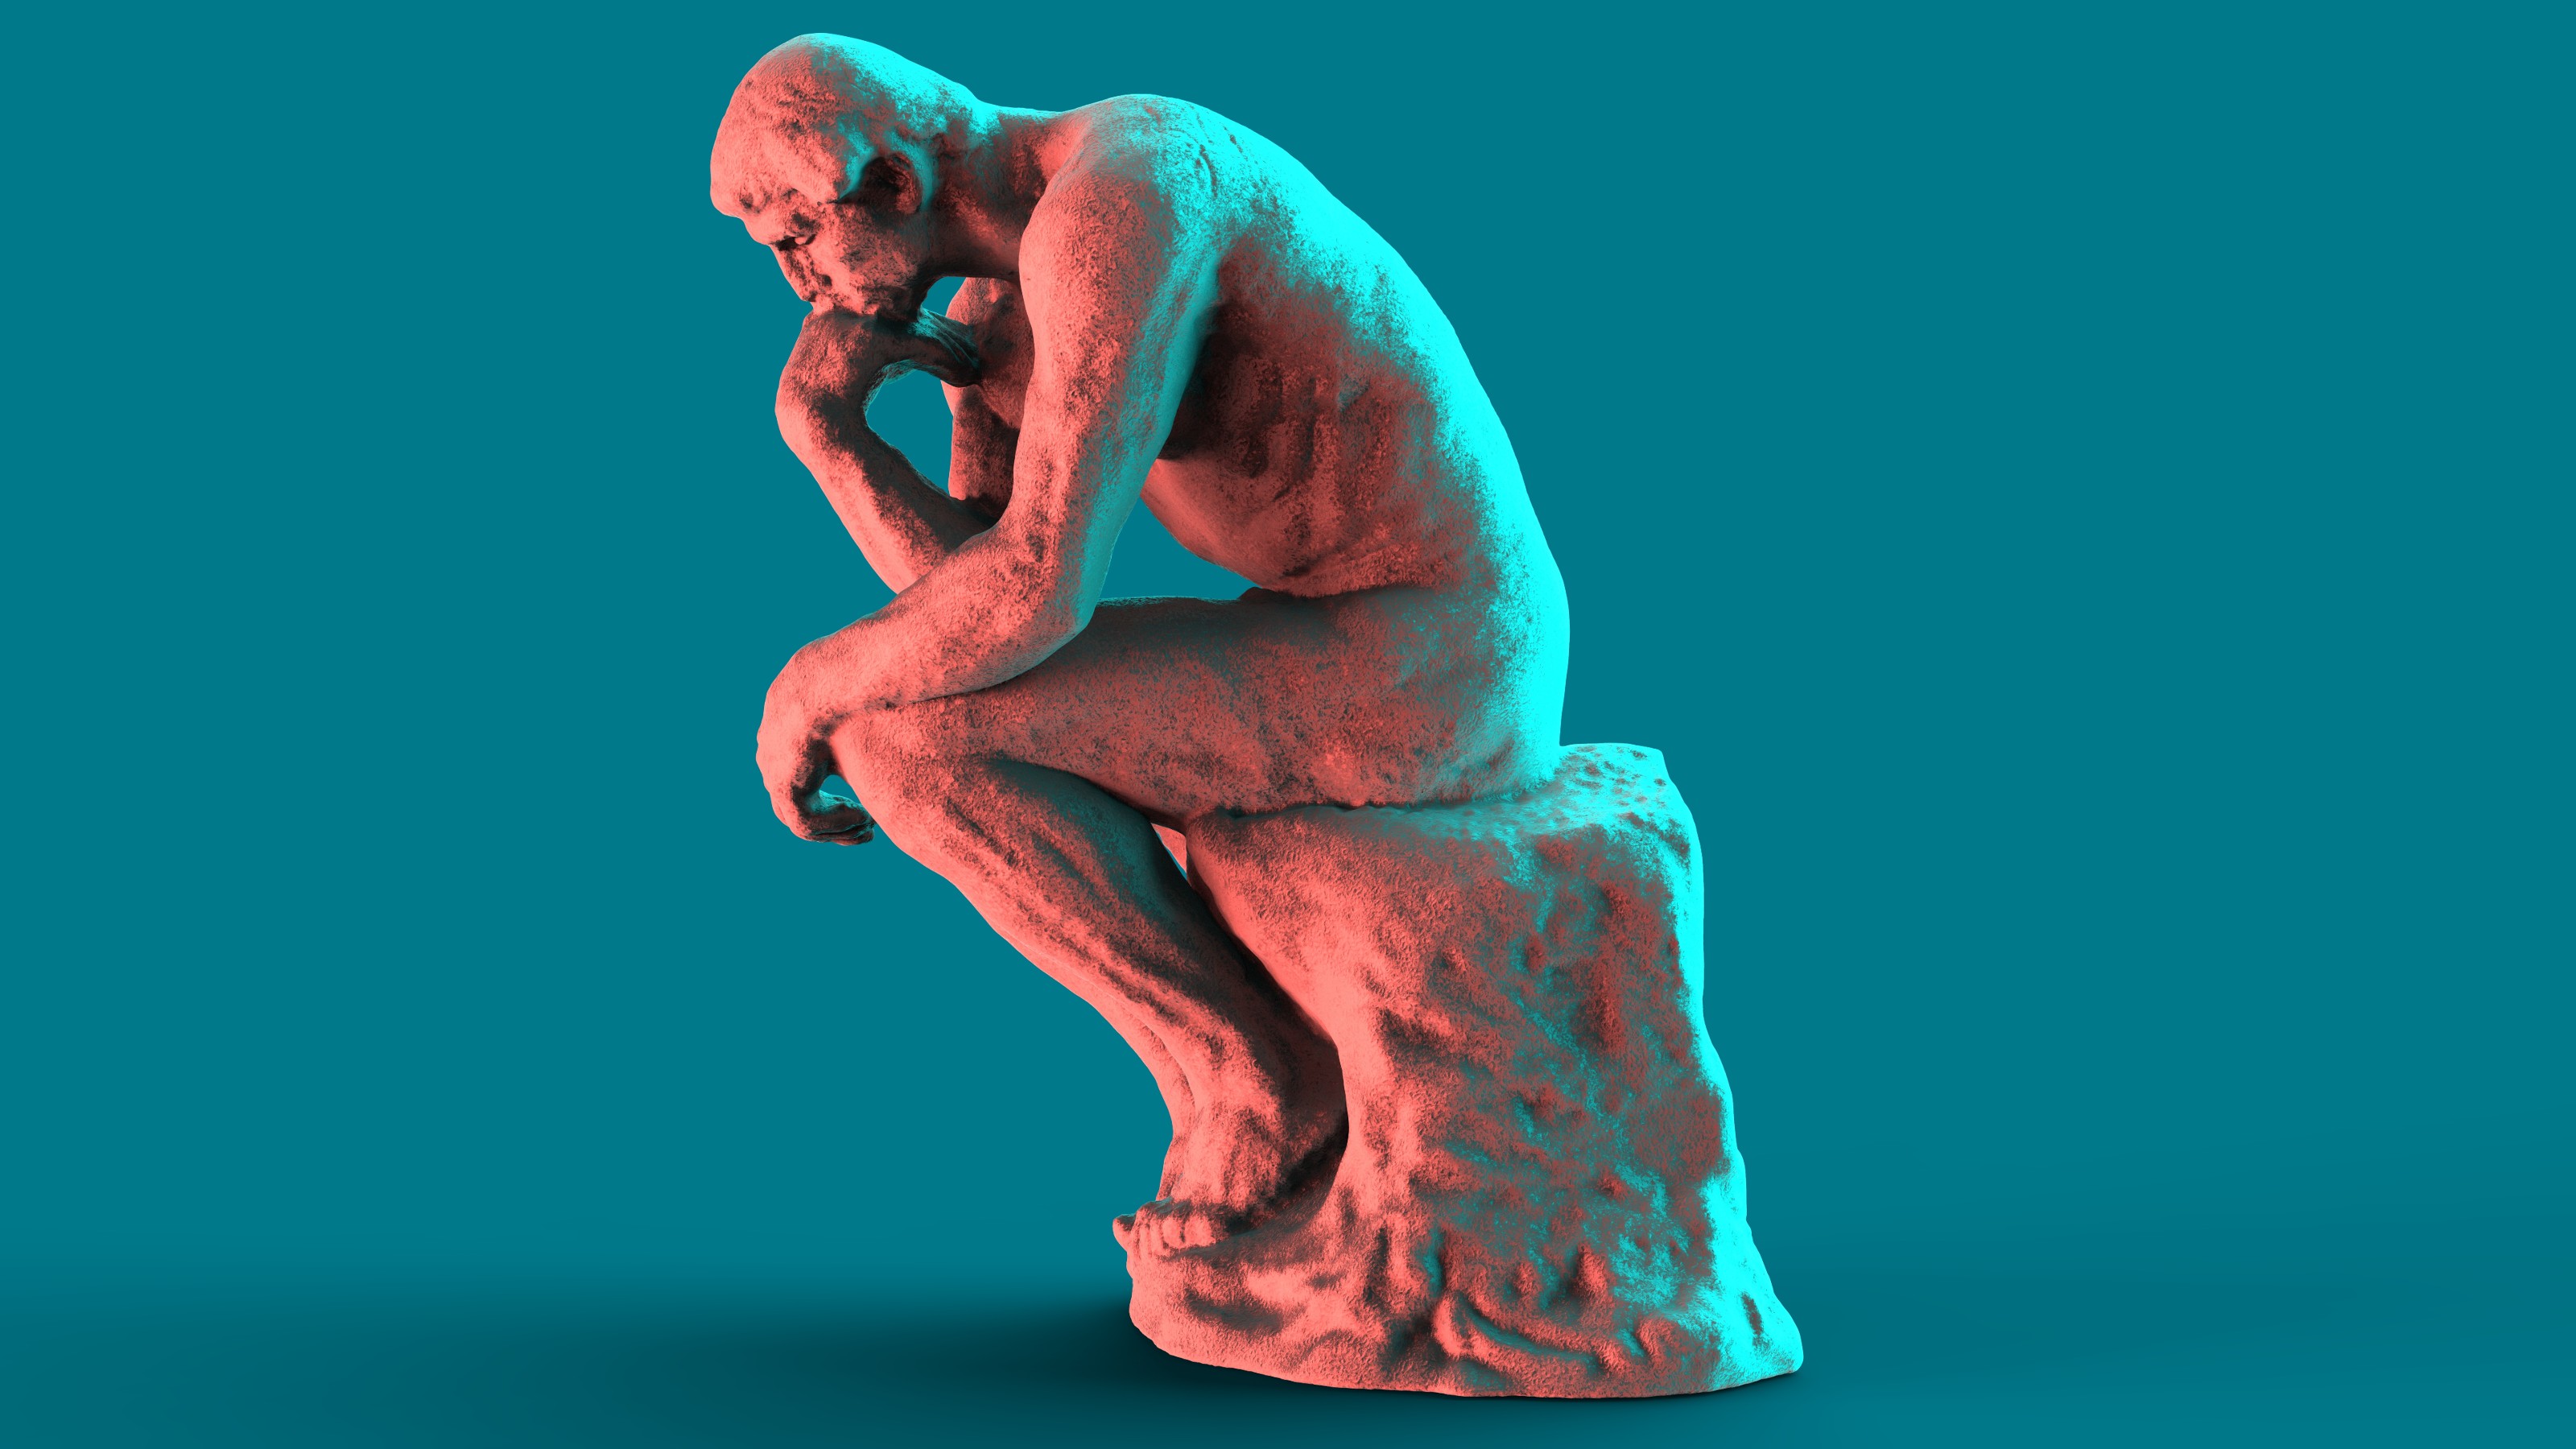 A statue of a thinker pondering philosophical ideas on a blue background.